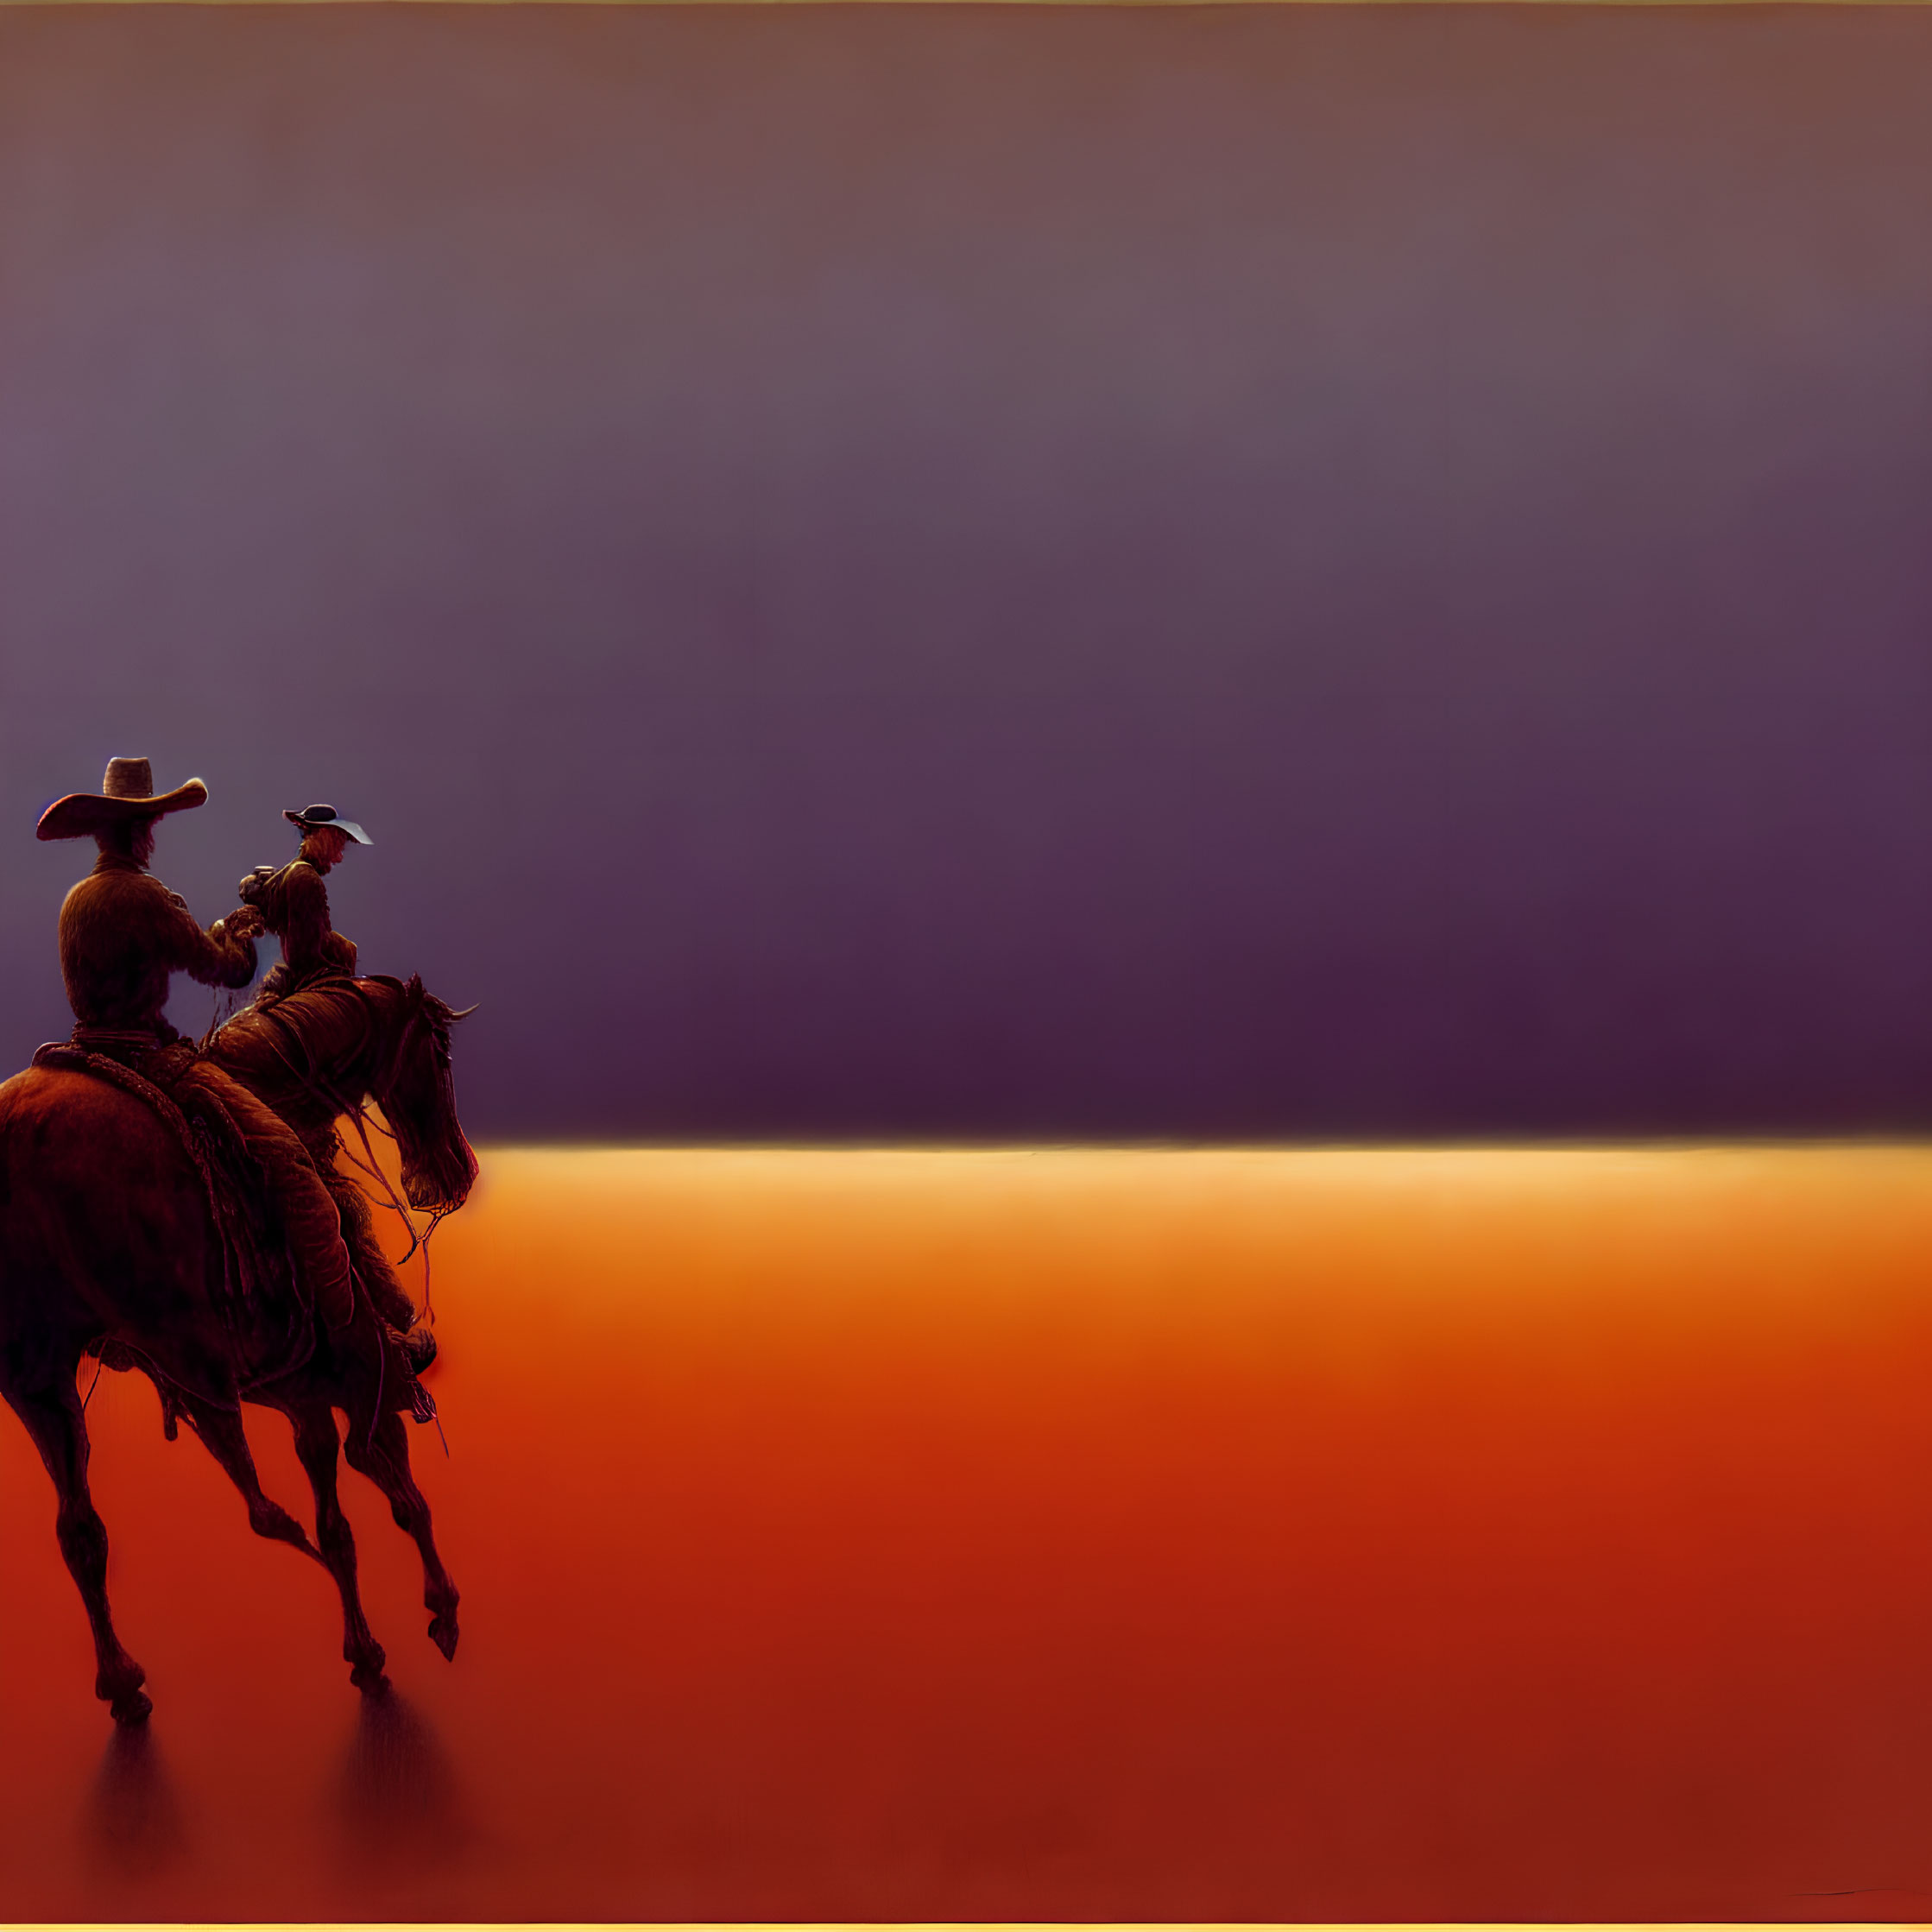 Two cowboys riding horses at dusk against vibrant orange and deep purple sky